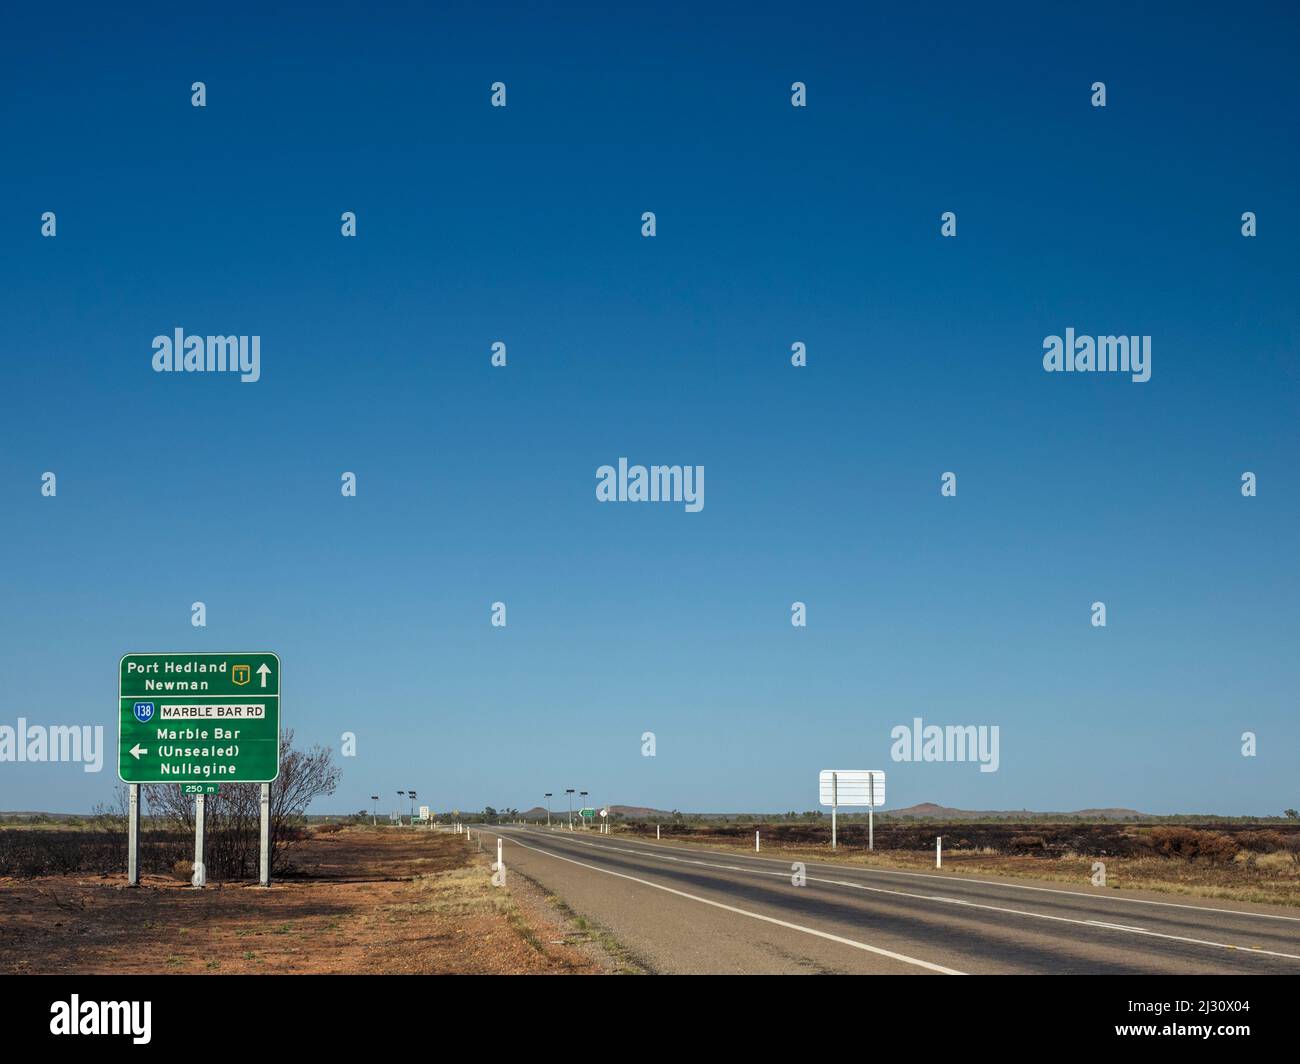 Marble Bar turn-off on the Great Northern Highway at Strelley near Port Hedland, Western Australia Stock Photo